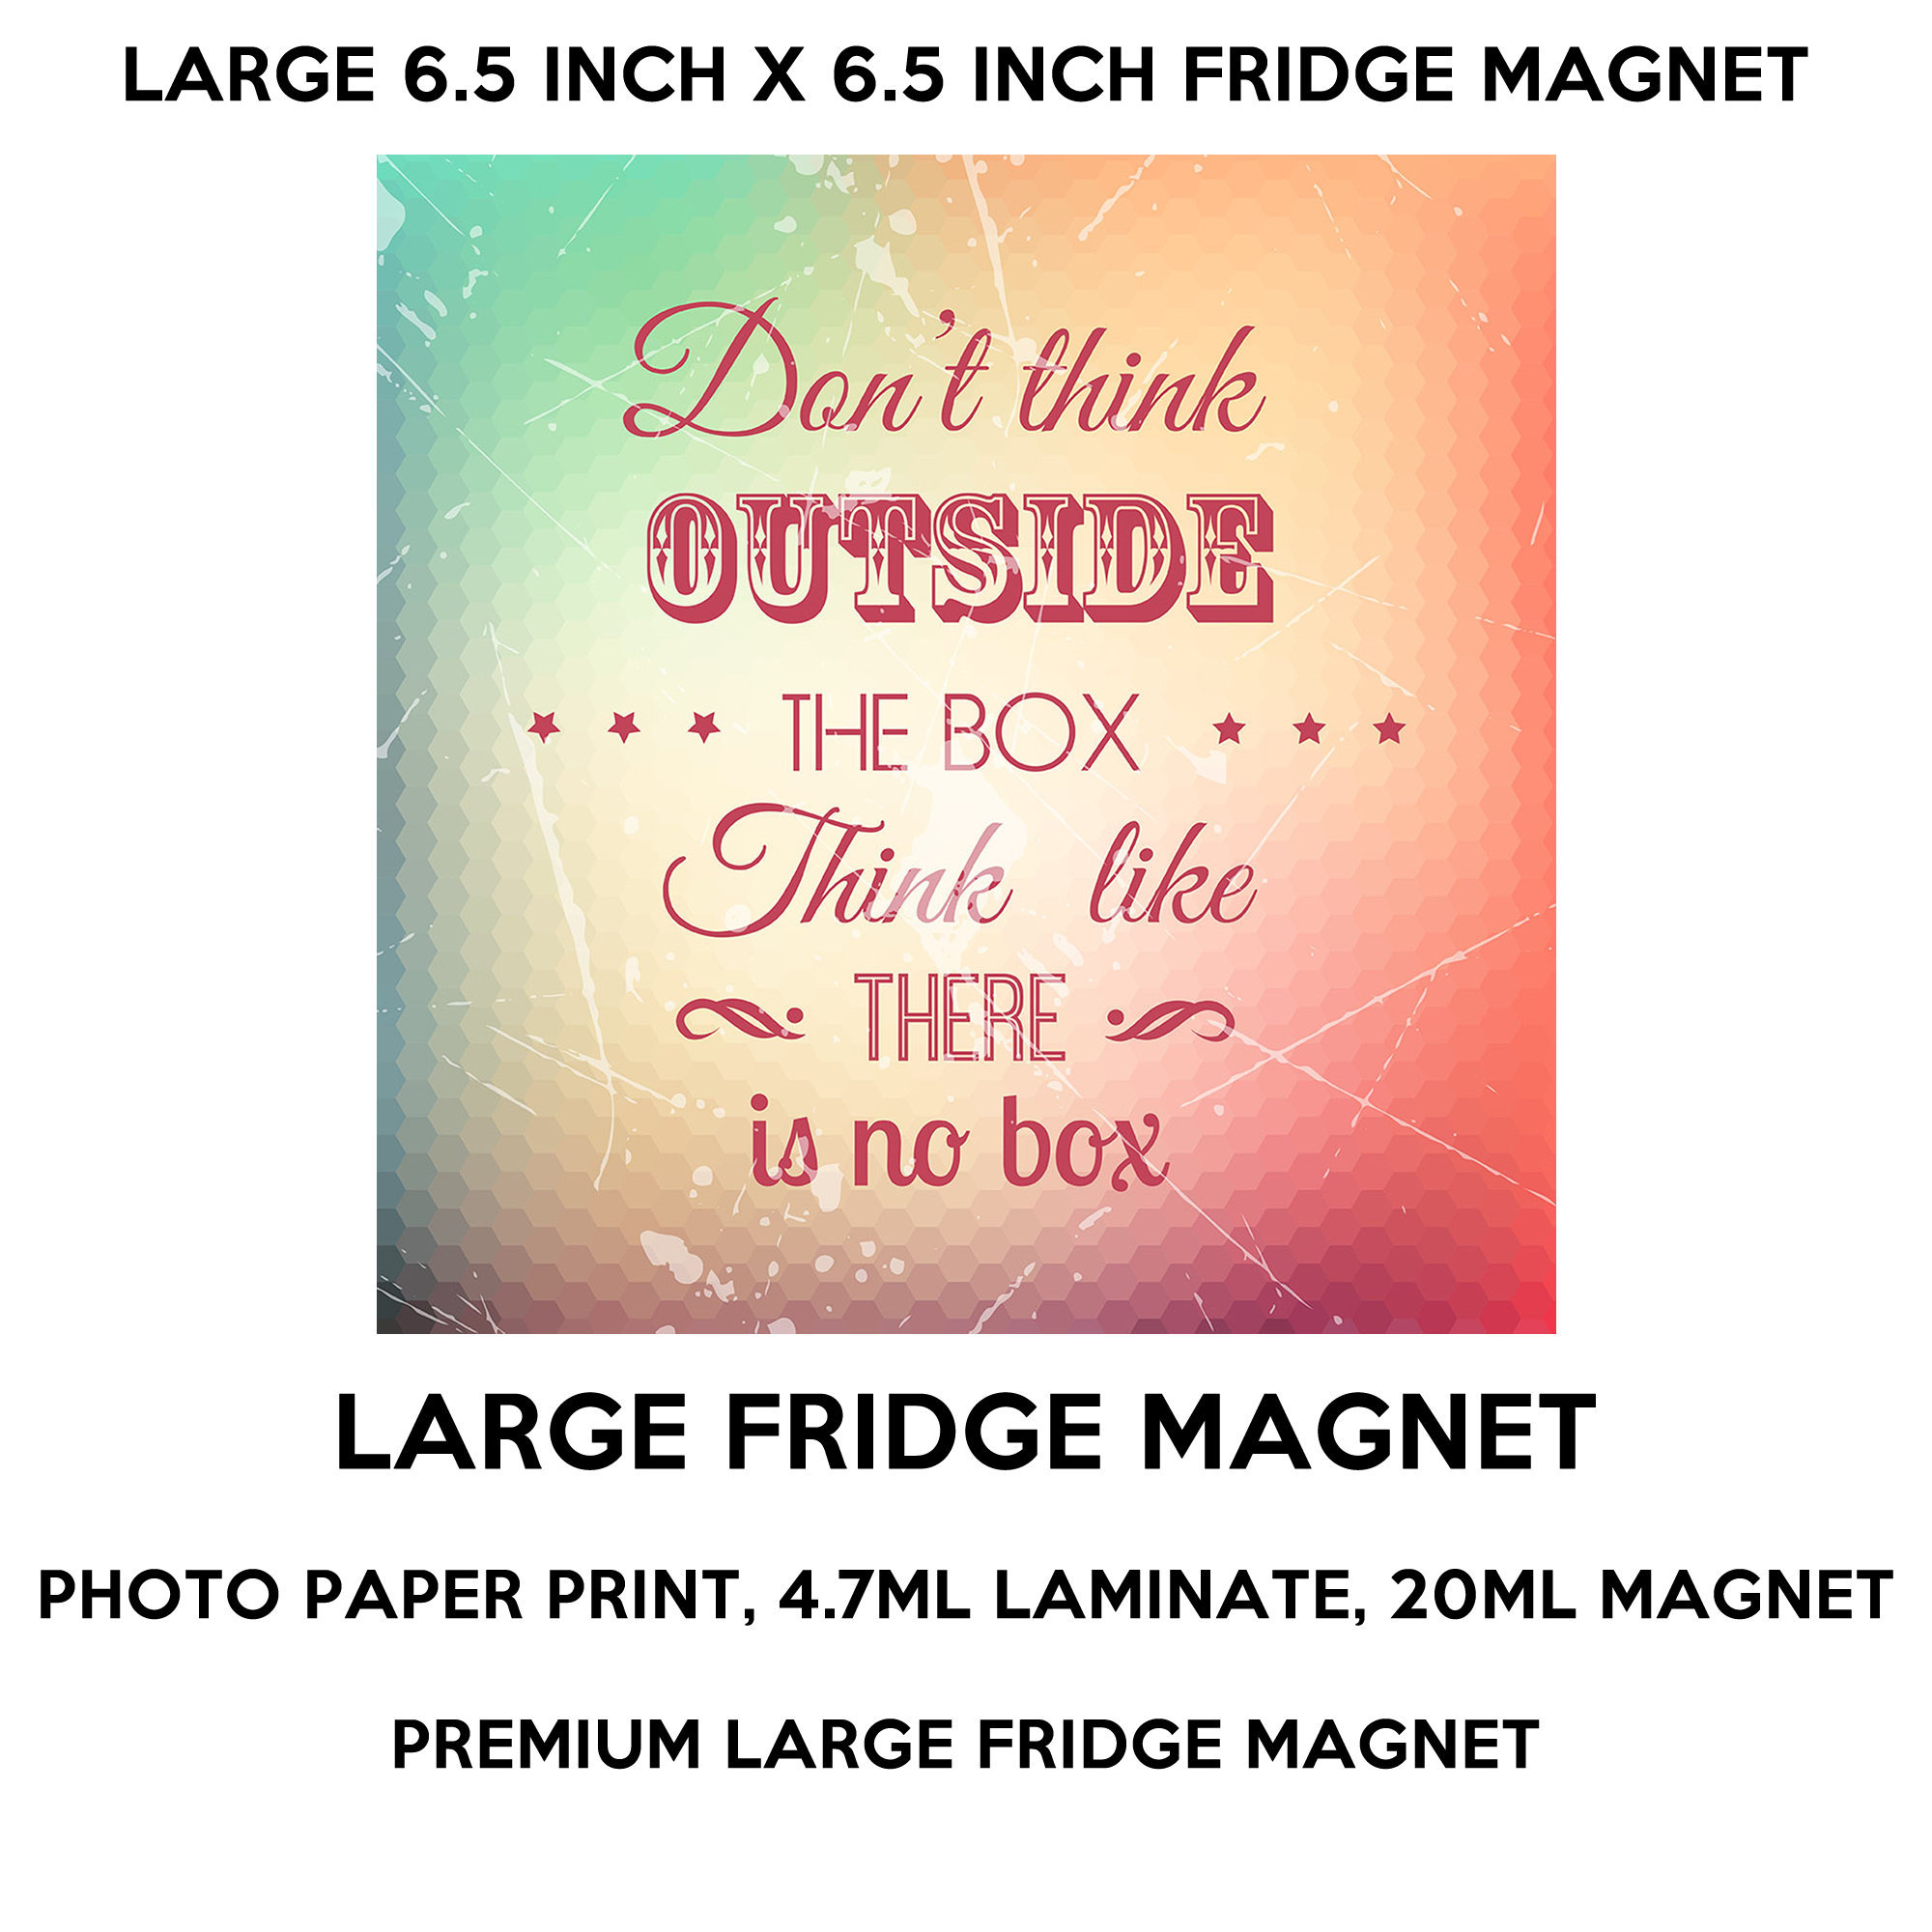 2 Magnets Deal Inflation Buster - Don't think outside the box think like there is no box 6.5 inch x 6.5 inch premium fridge magnet